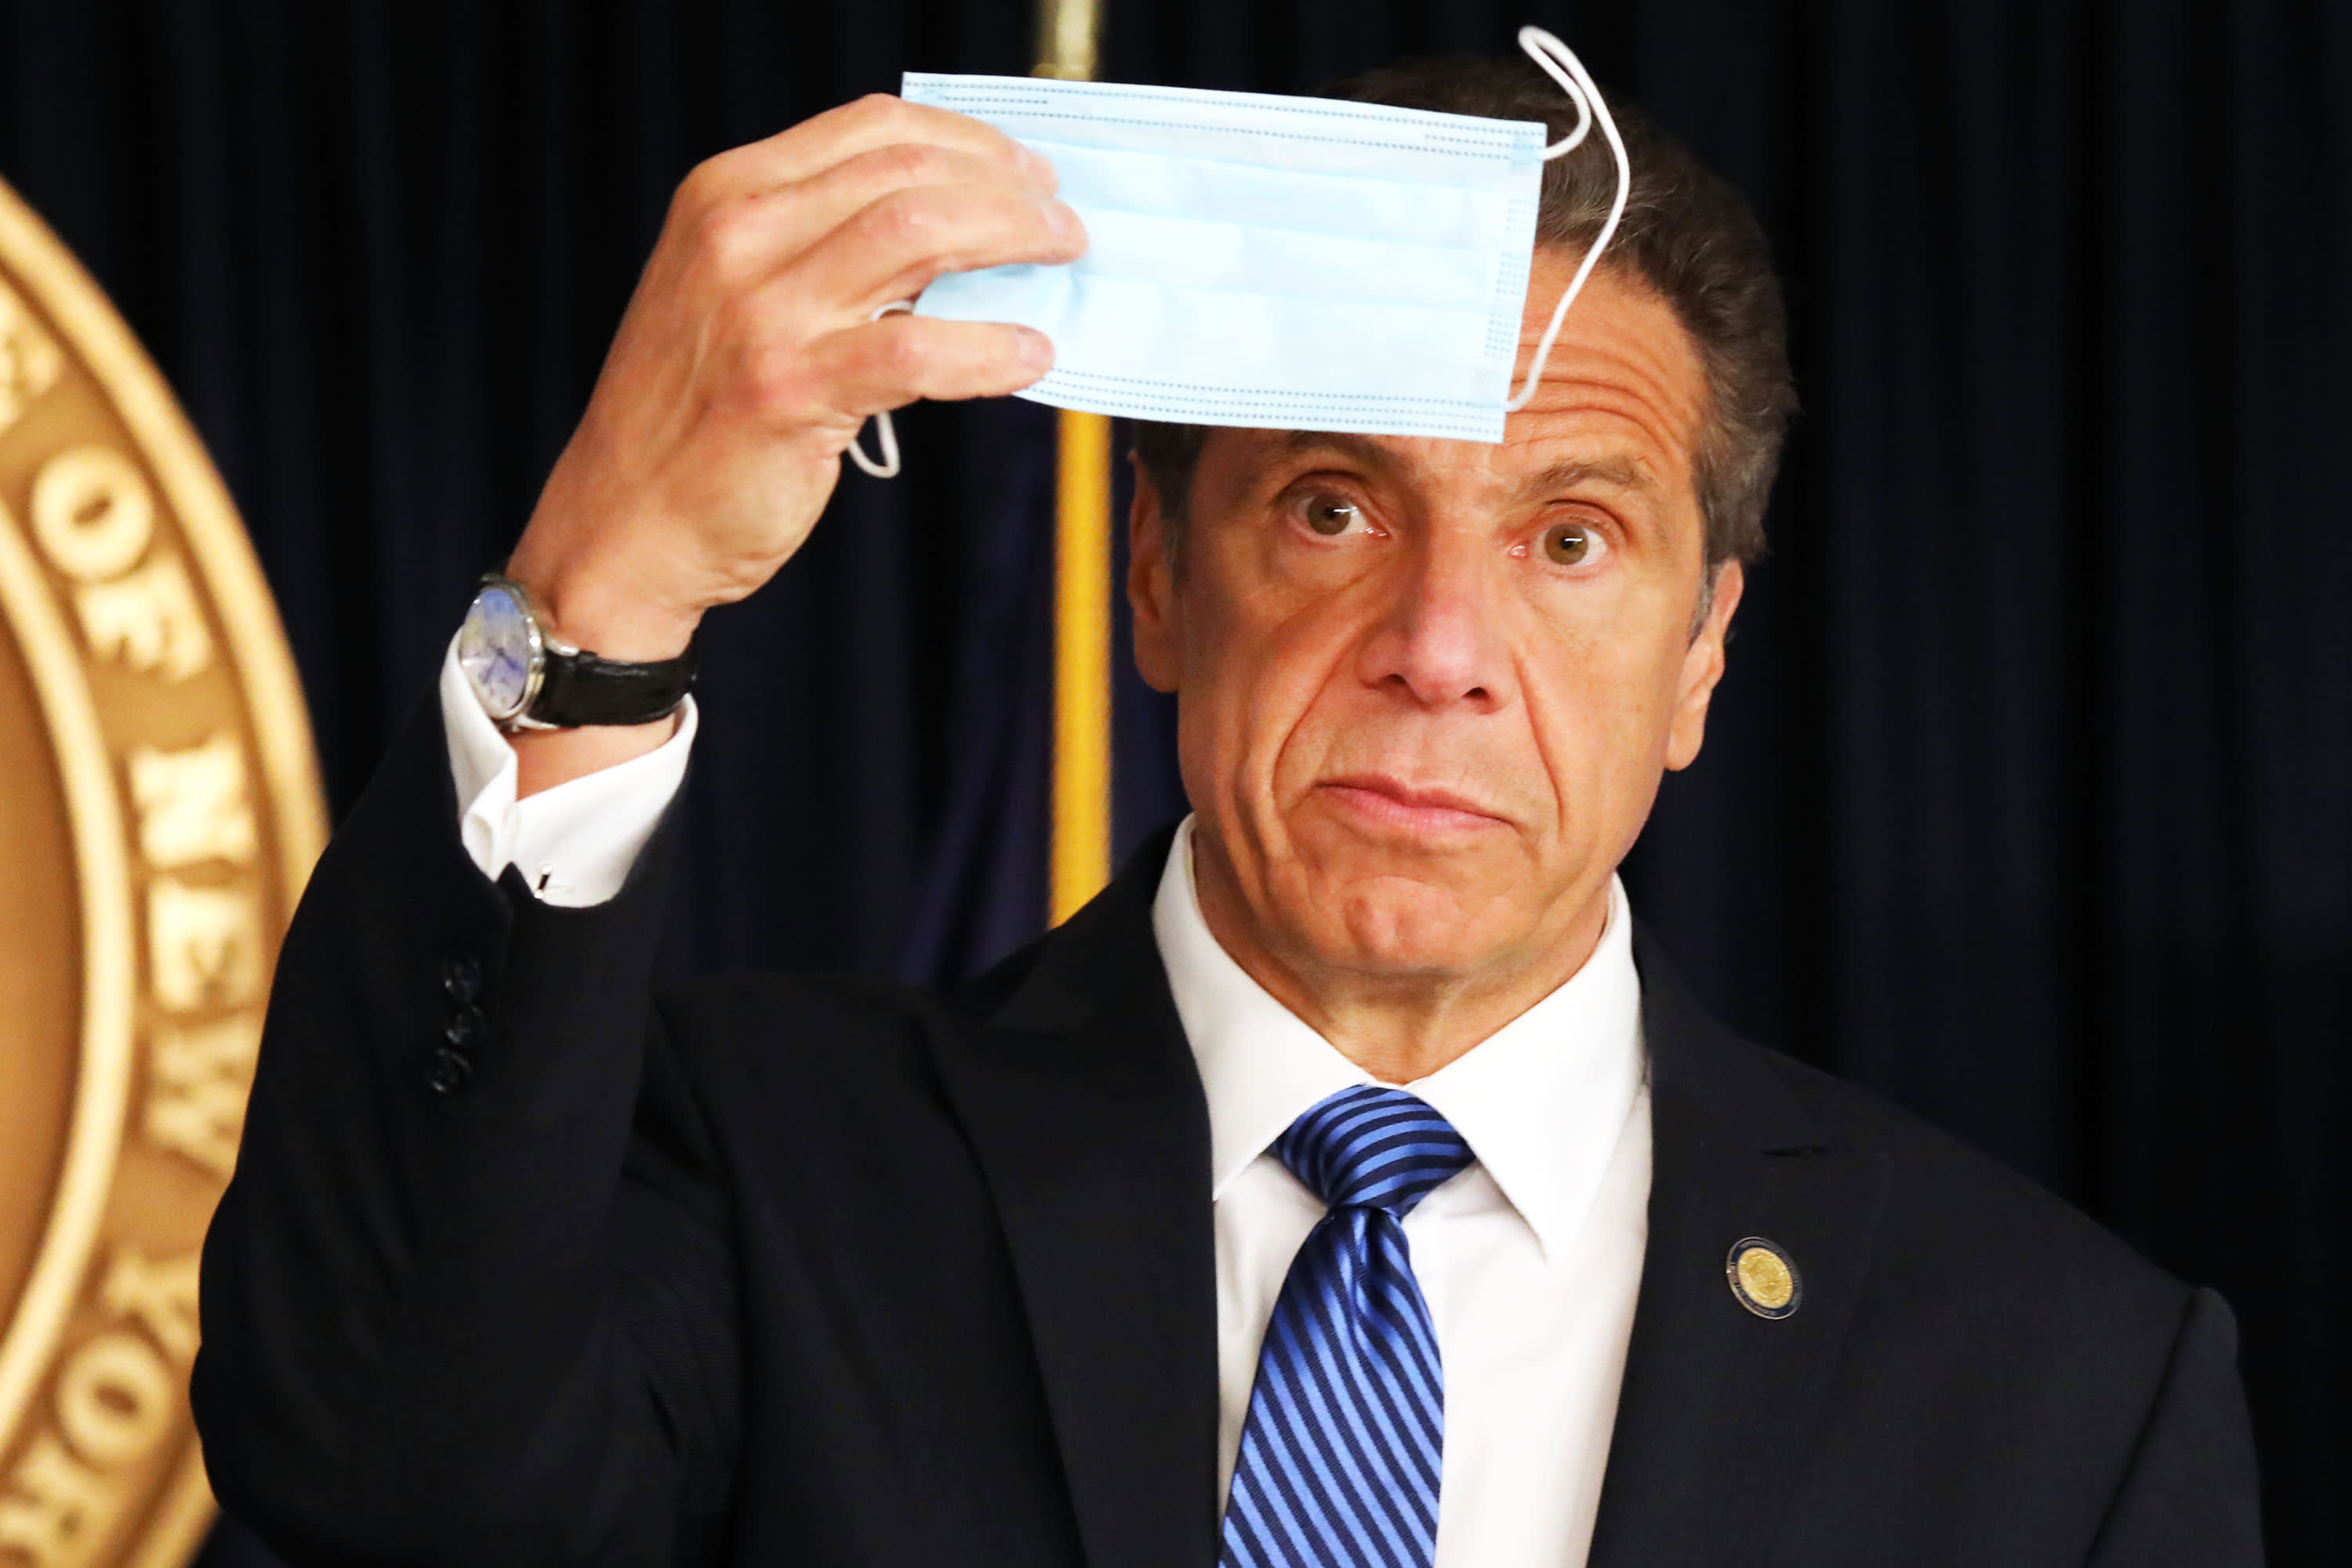 Andrew Cuomo, accuser of sexual harassment, speaks as the investigation speeds up